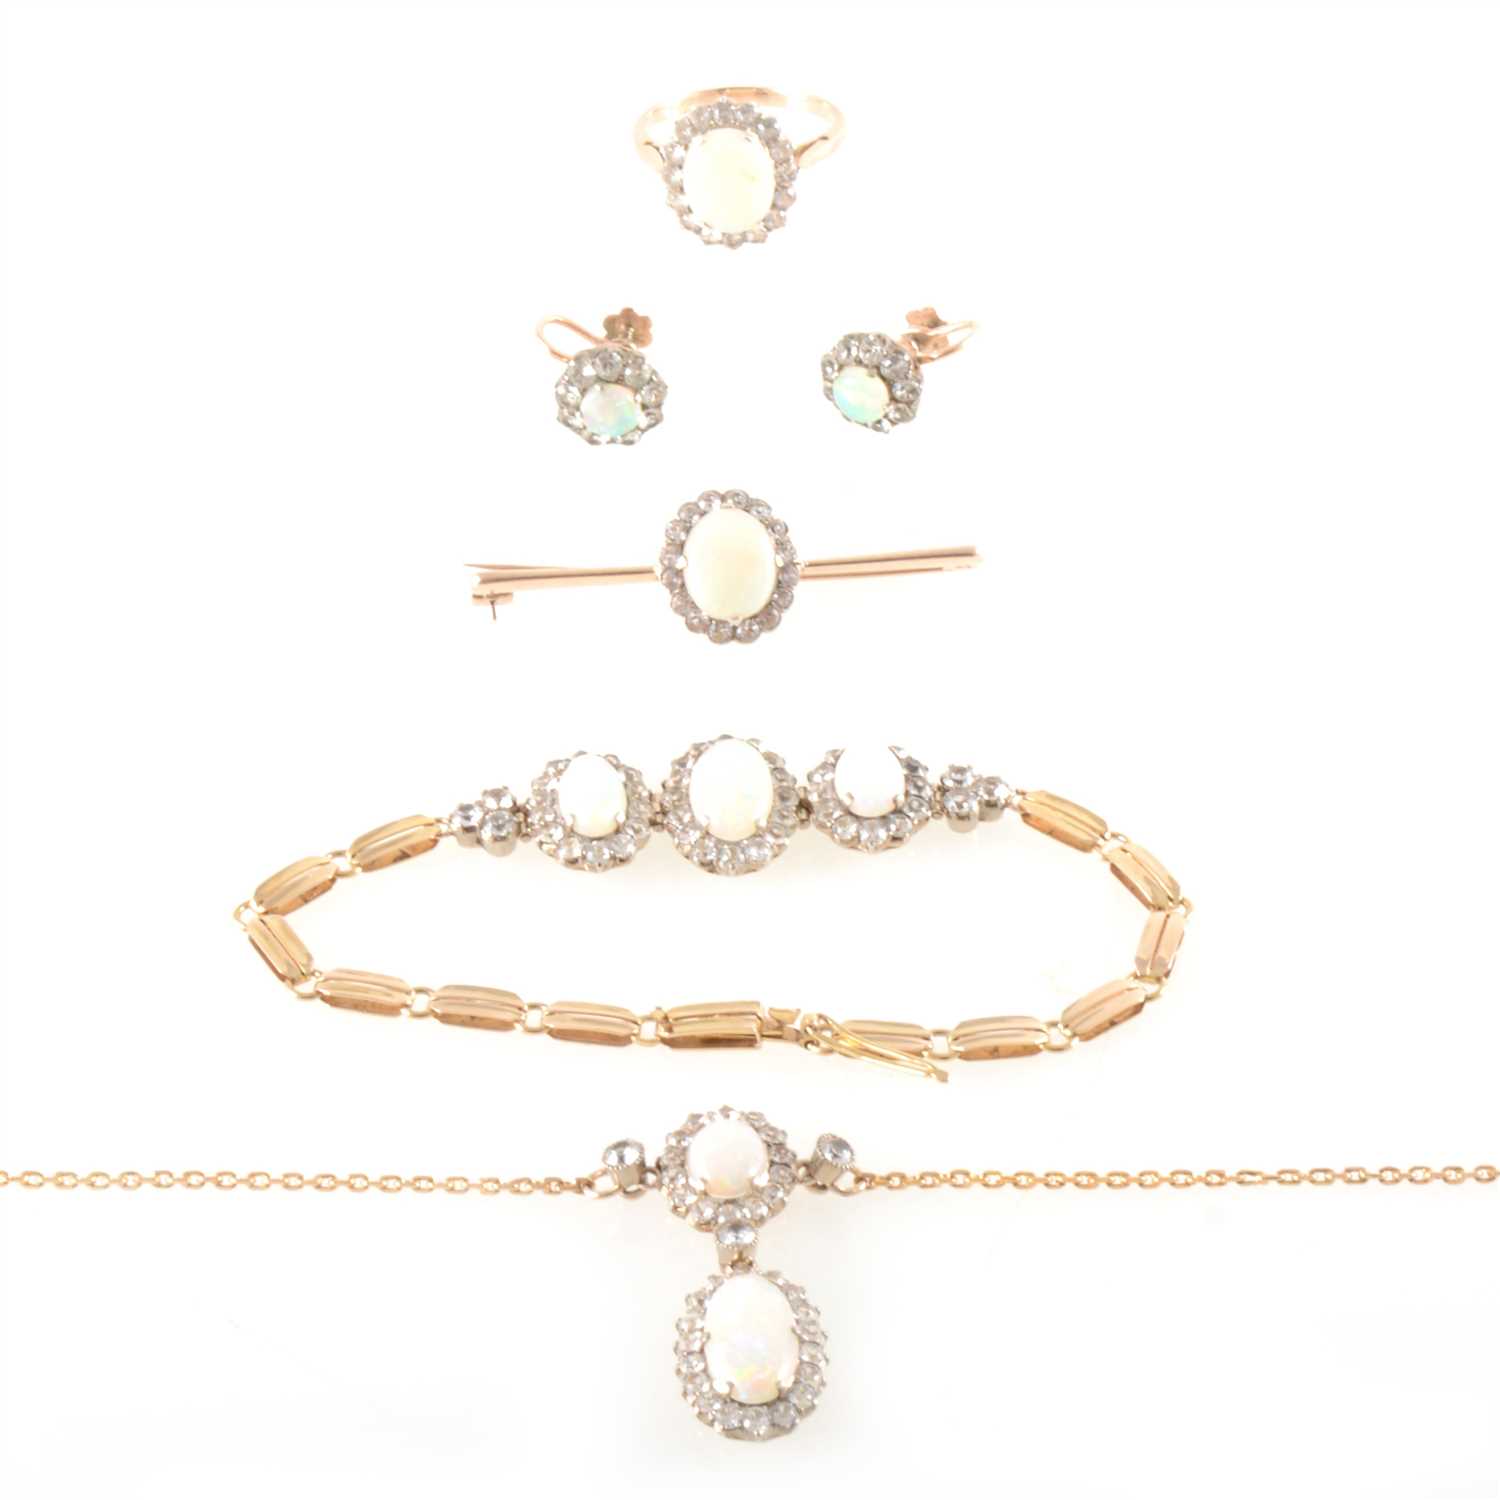 Lot 184 - A suite of opal jewellery - necklace, bracelet, brooch, earrings and ring.